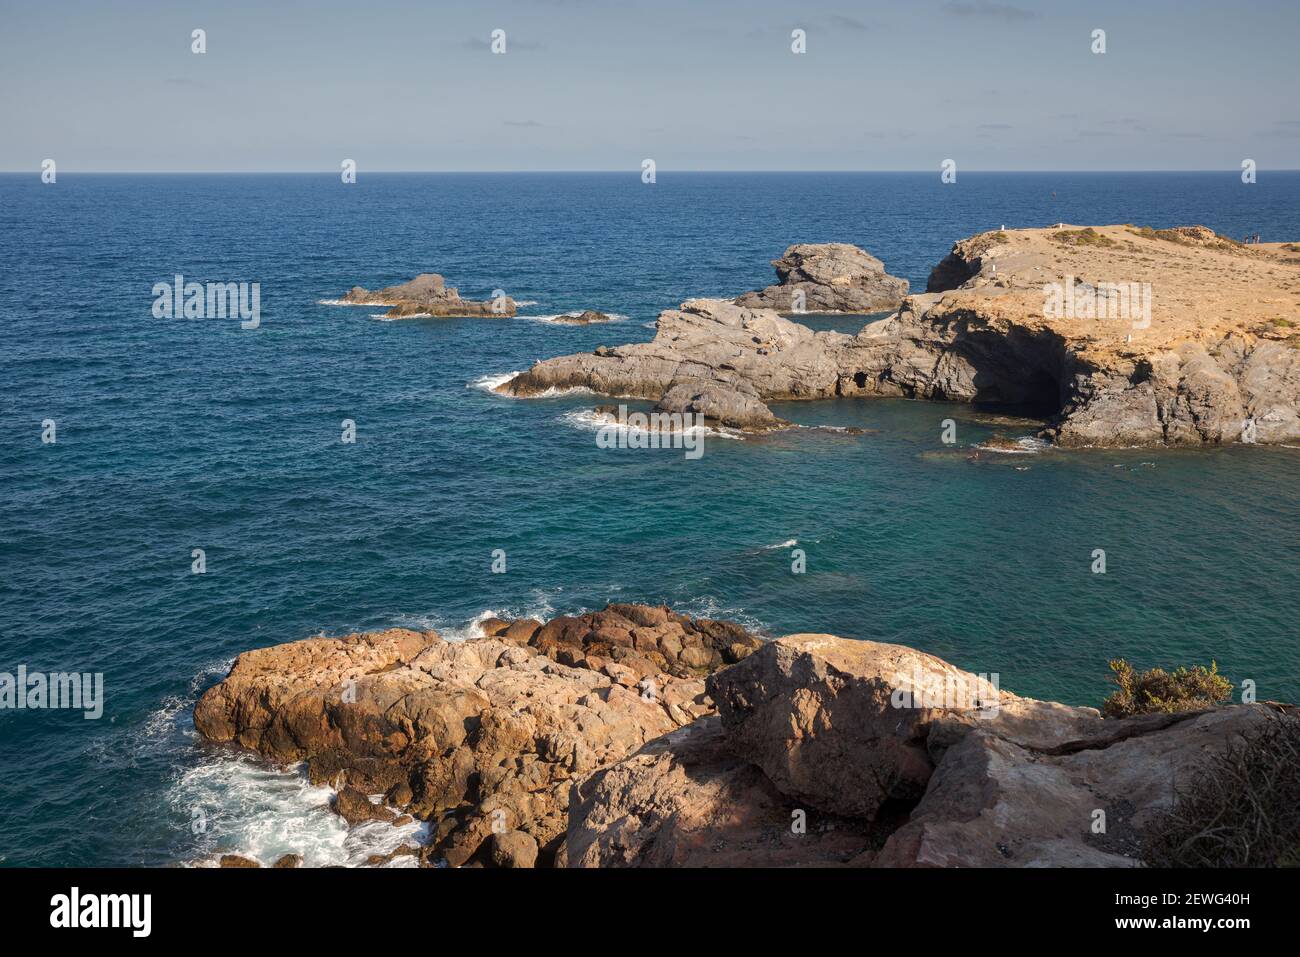 Views of Cape Palos, Cabo de Palos in Spanish. It is located in the  municipality of Cartagena, region of Murcia, Spain Stock Photo - Alamy